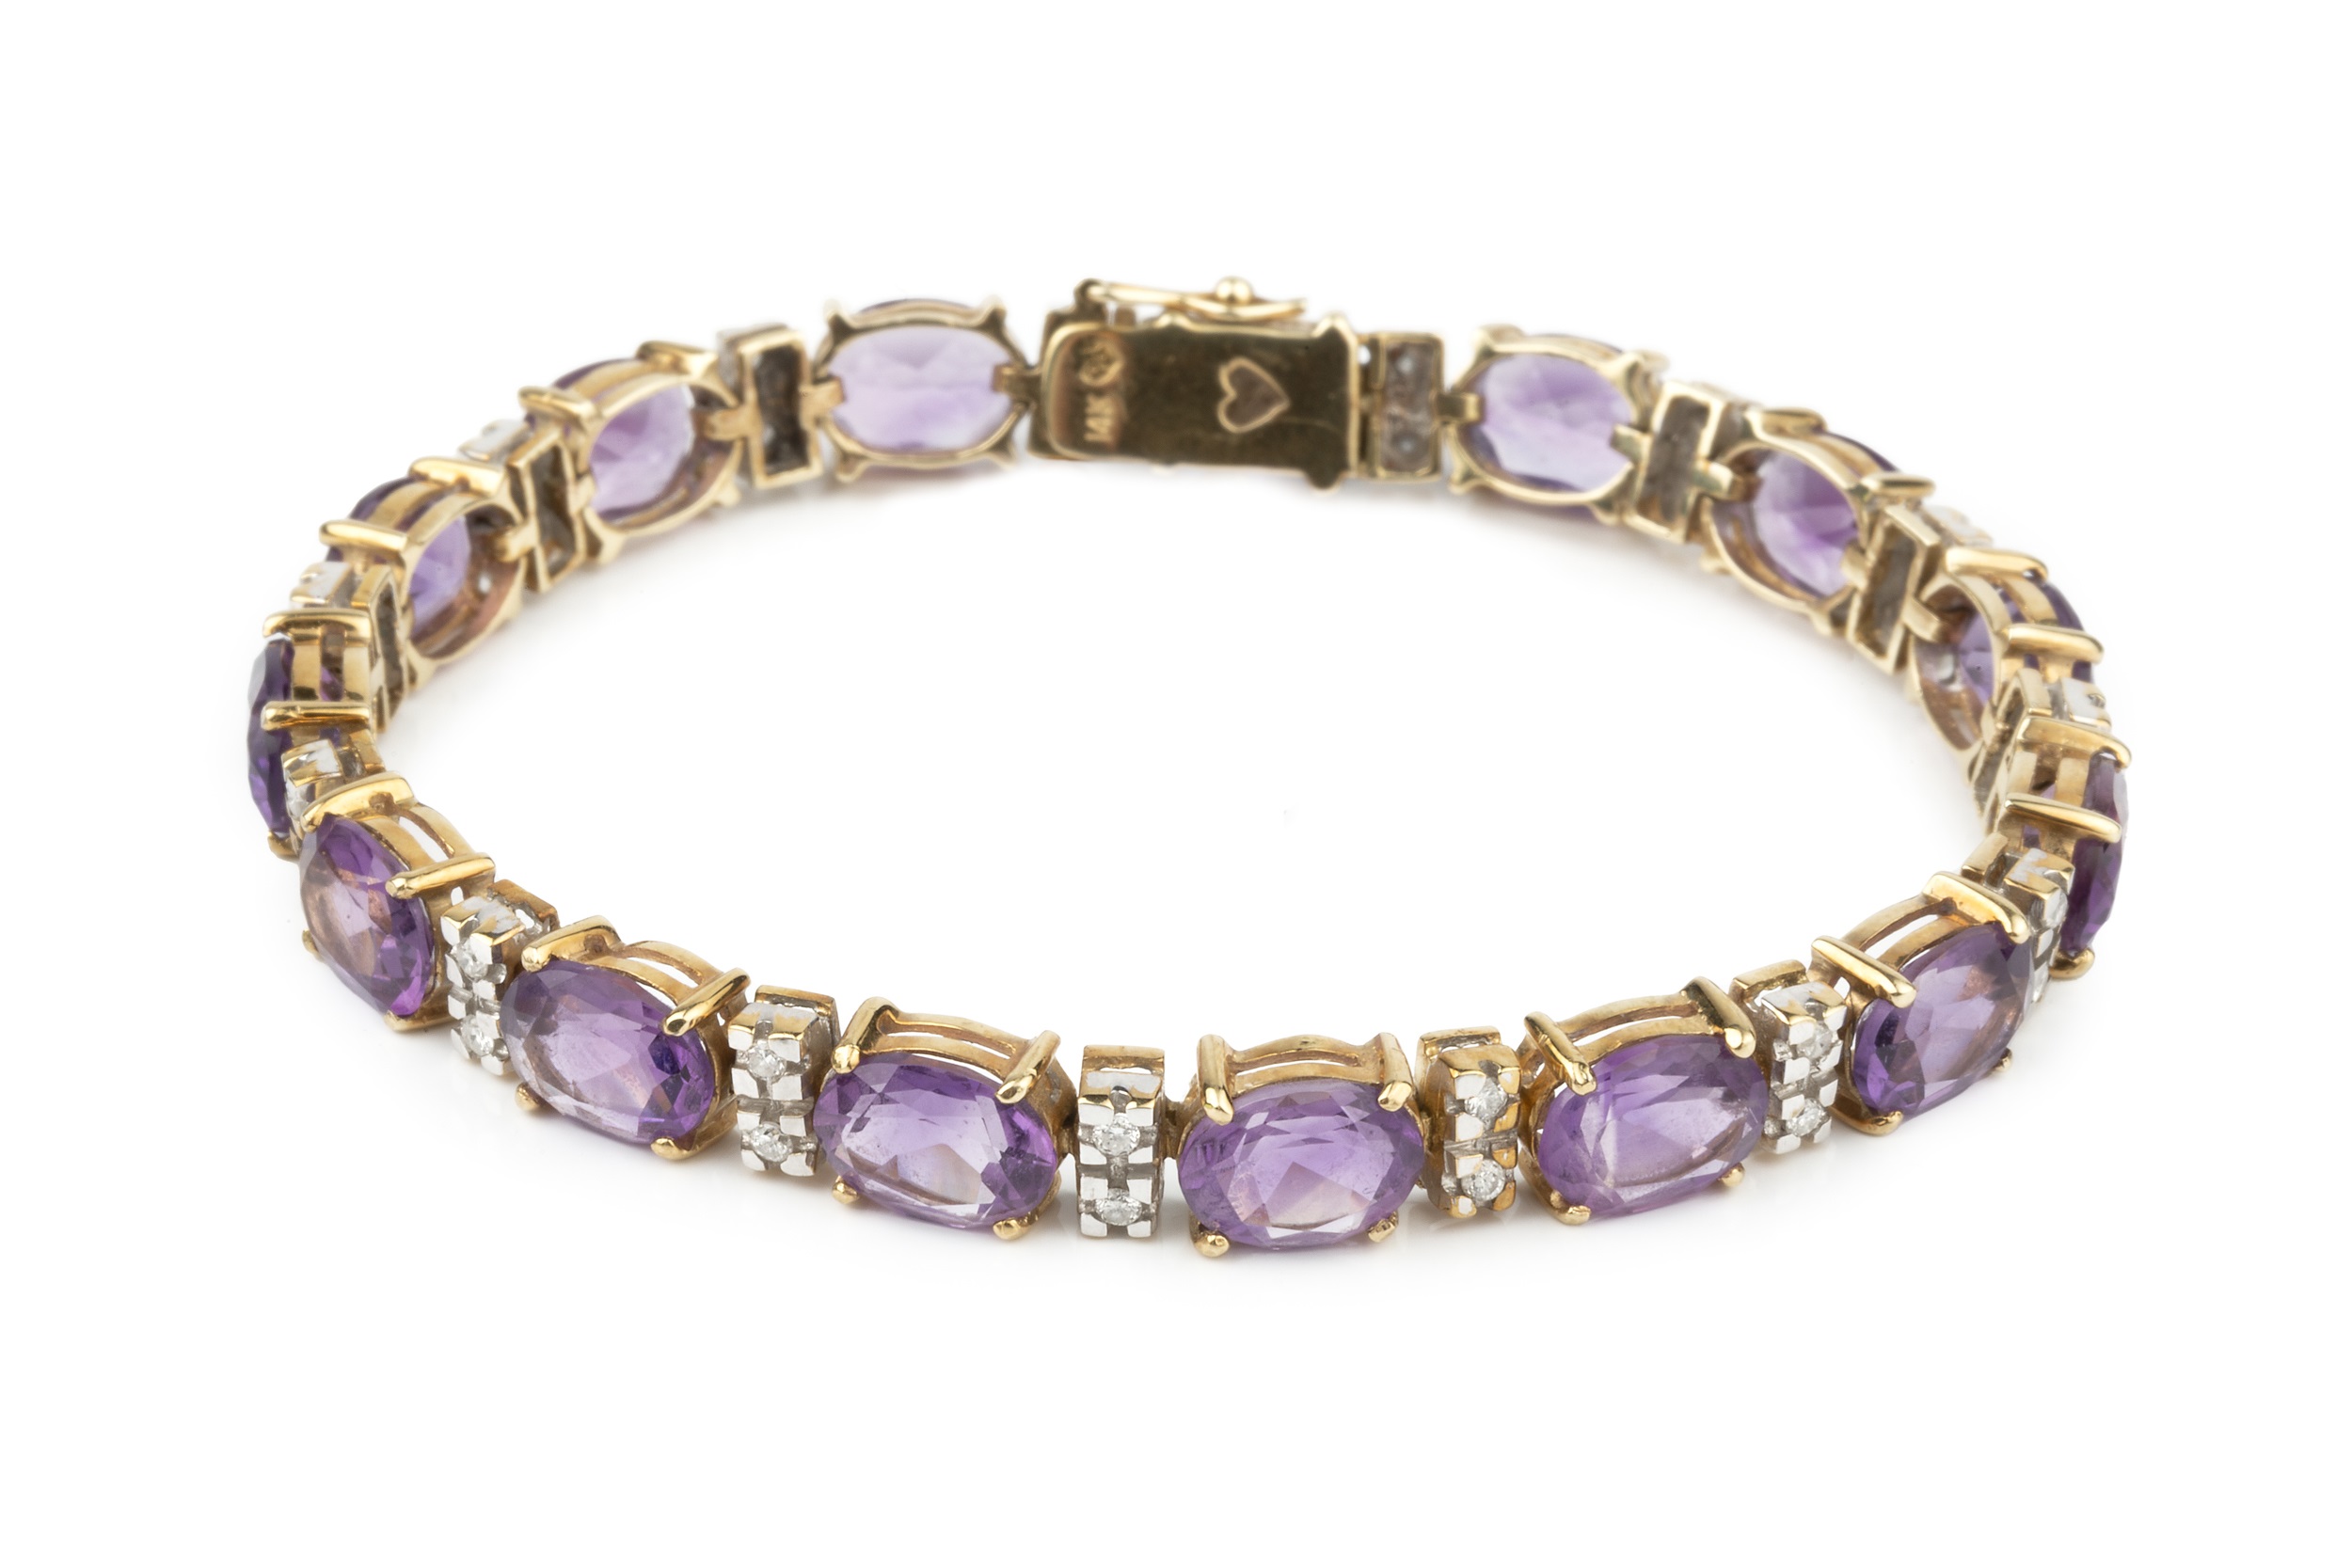 An amethyst and diamond bracelet, set with oval cut amethysts and having spacer bars between set